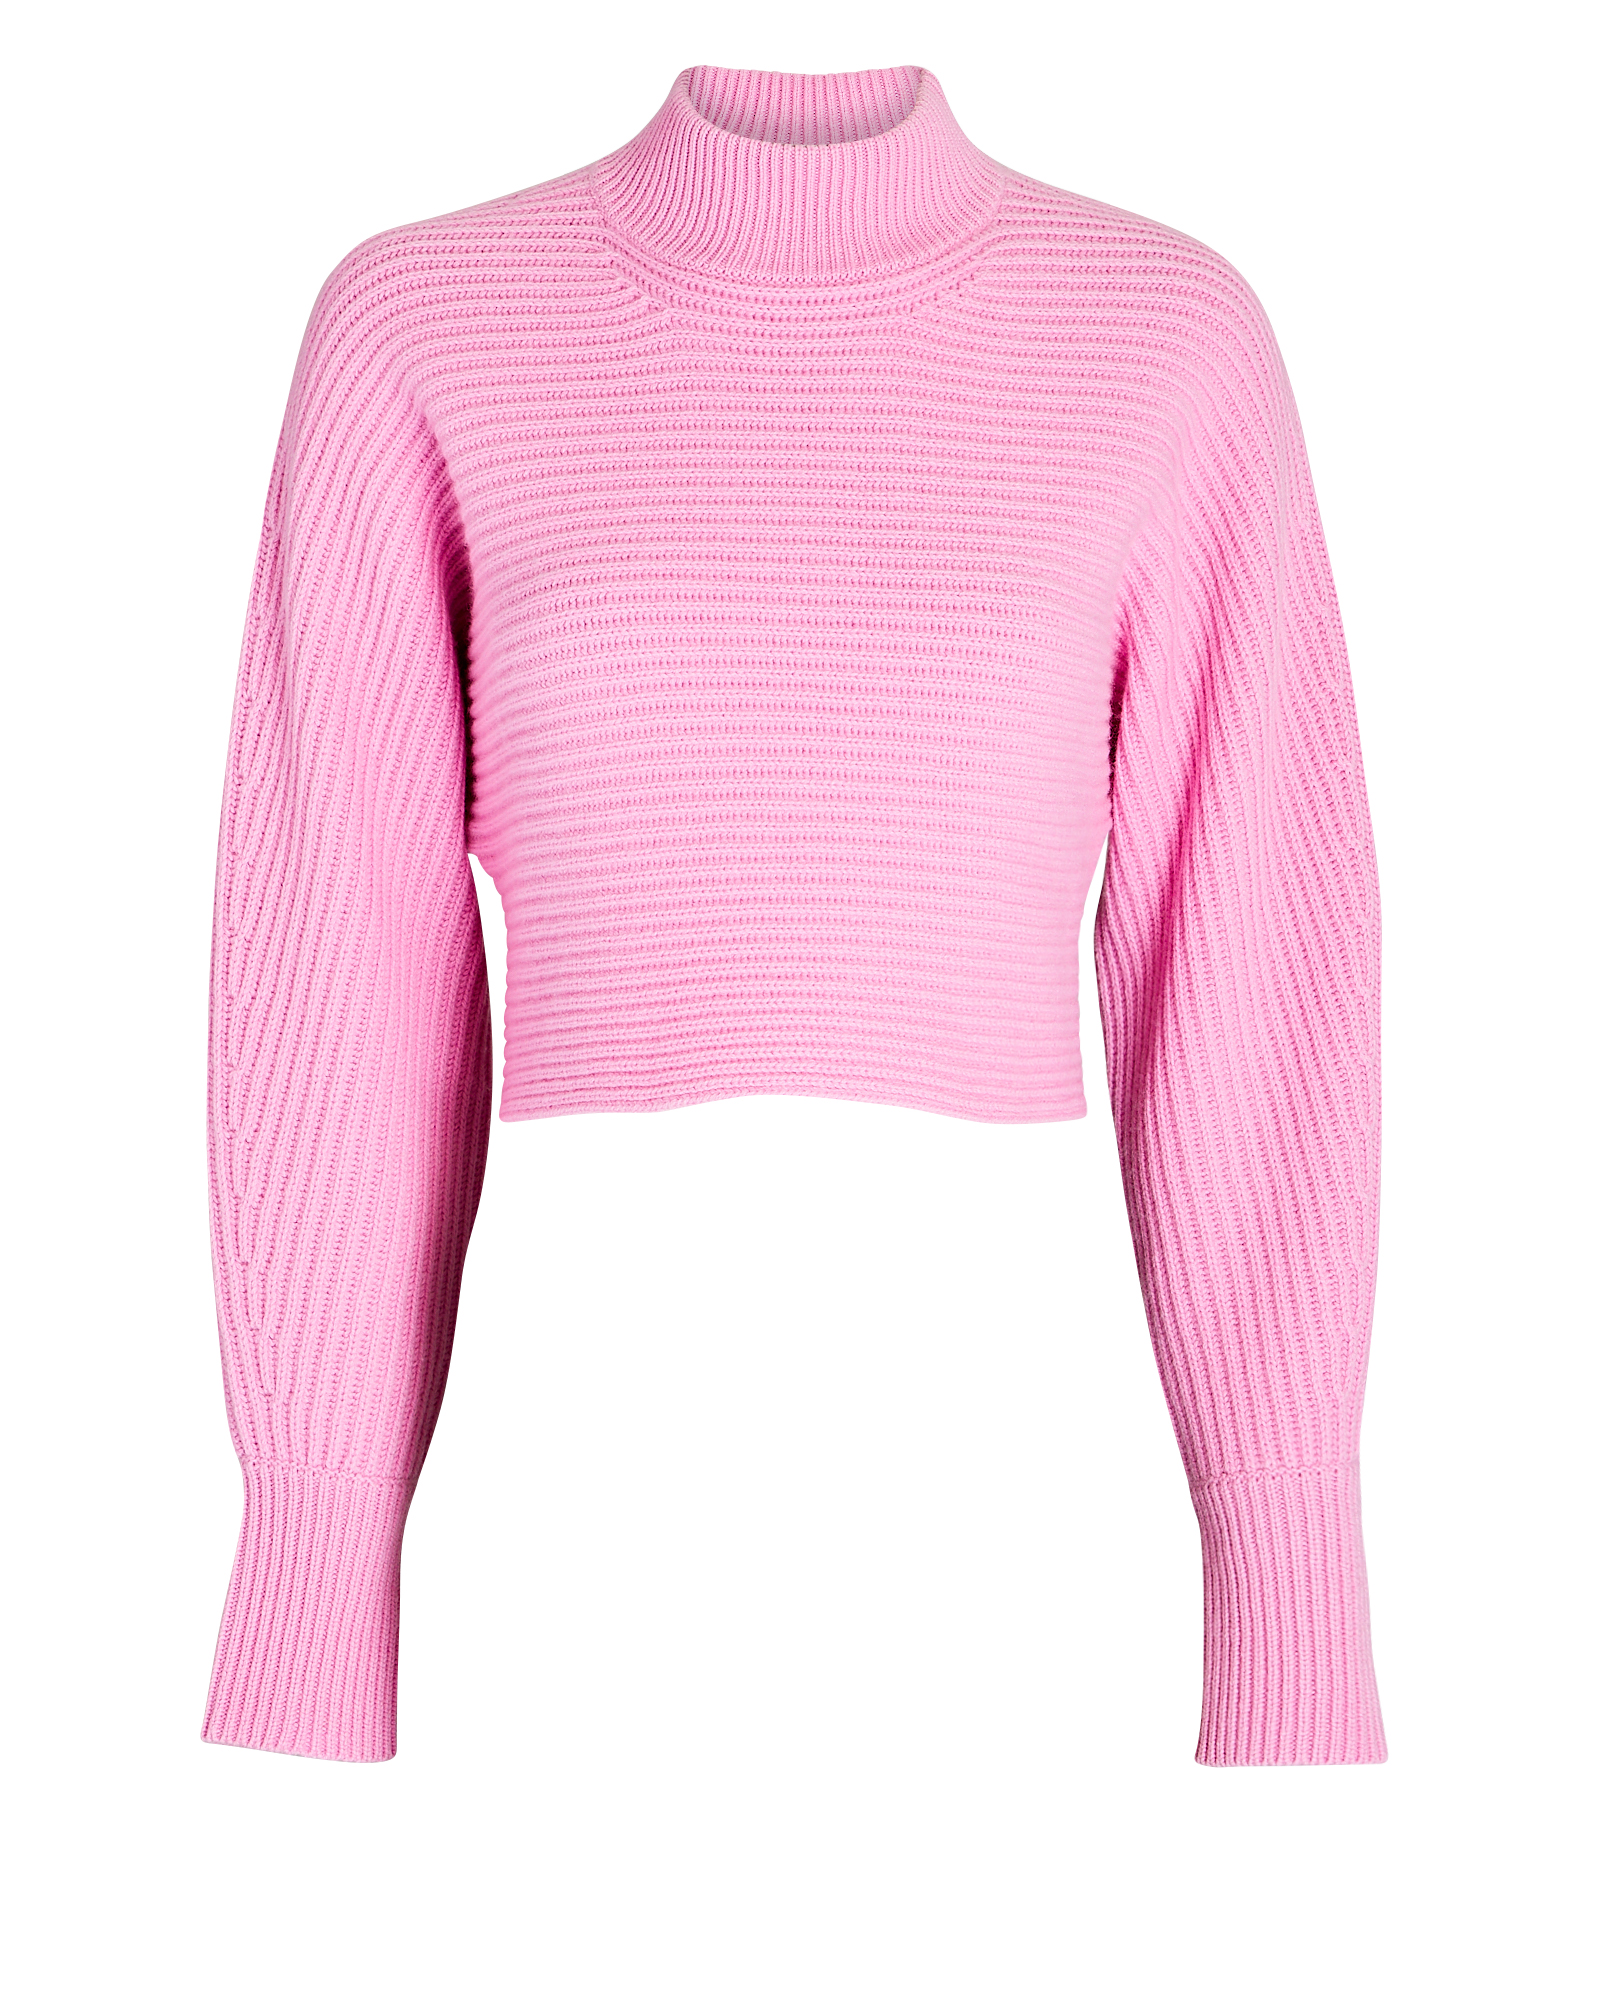 INTERMIX Private Label Fay Turtleneck In Pink | INTERMIX®